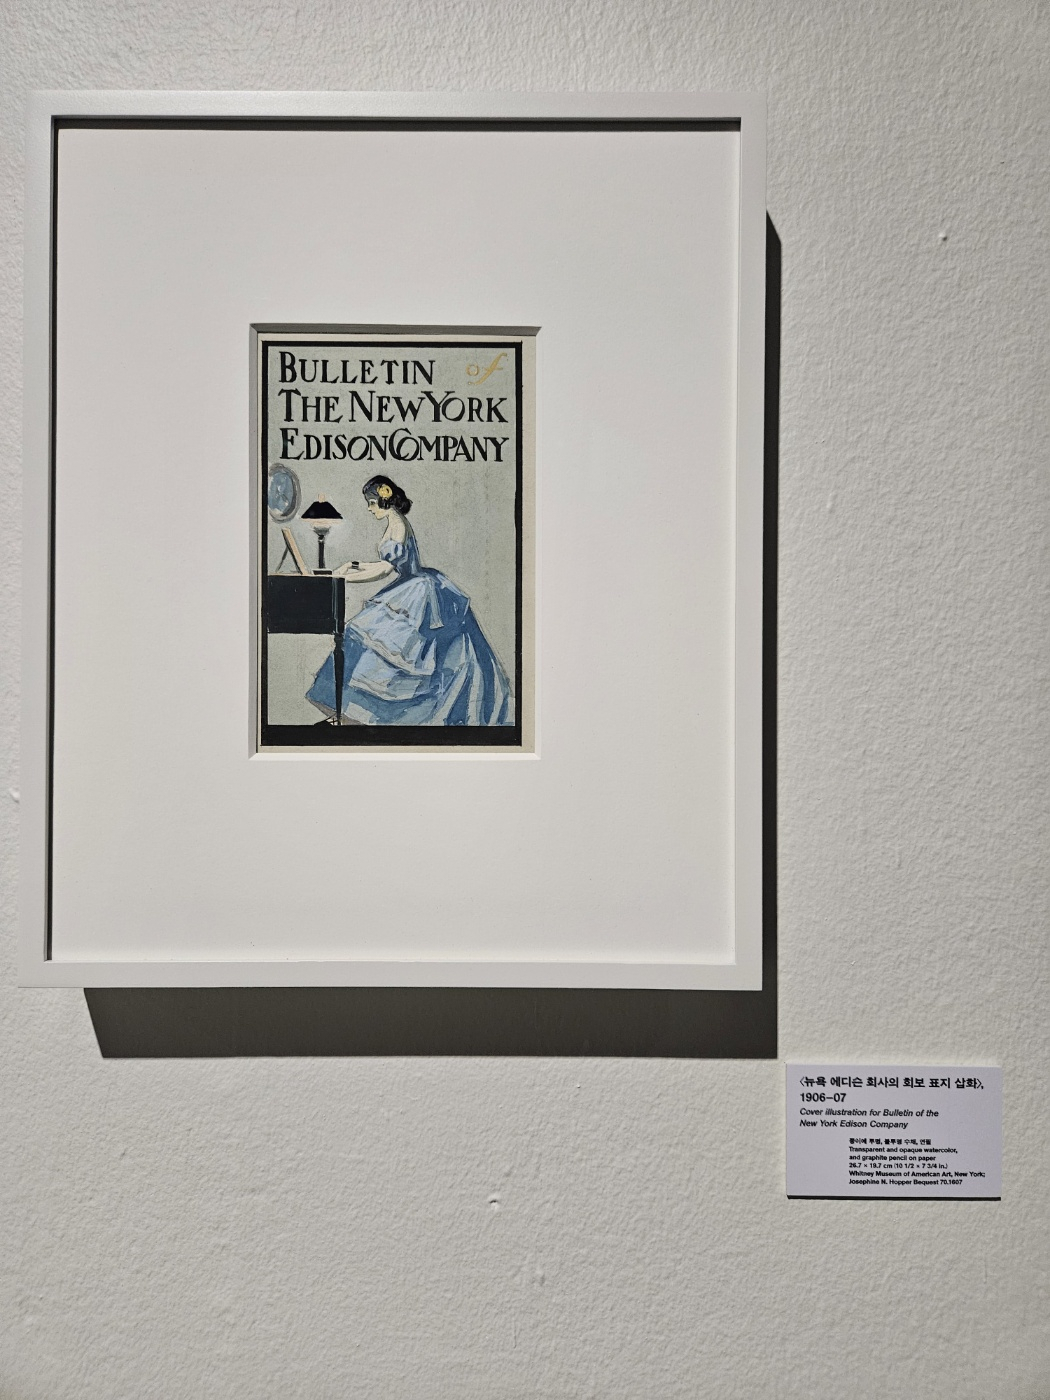 Edward Hopper's cover illustration for Bulletin of the New York Edison Company is on display at “Edward Hopper: From City to Coast” at Seoul Museum of Art. (Park Yuna/The Korea Herald)